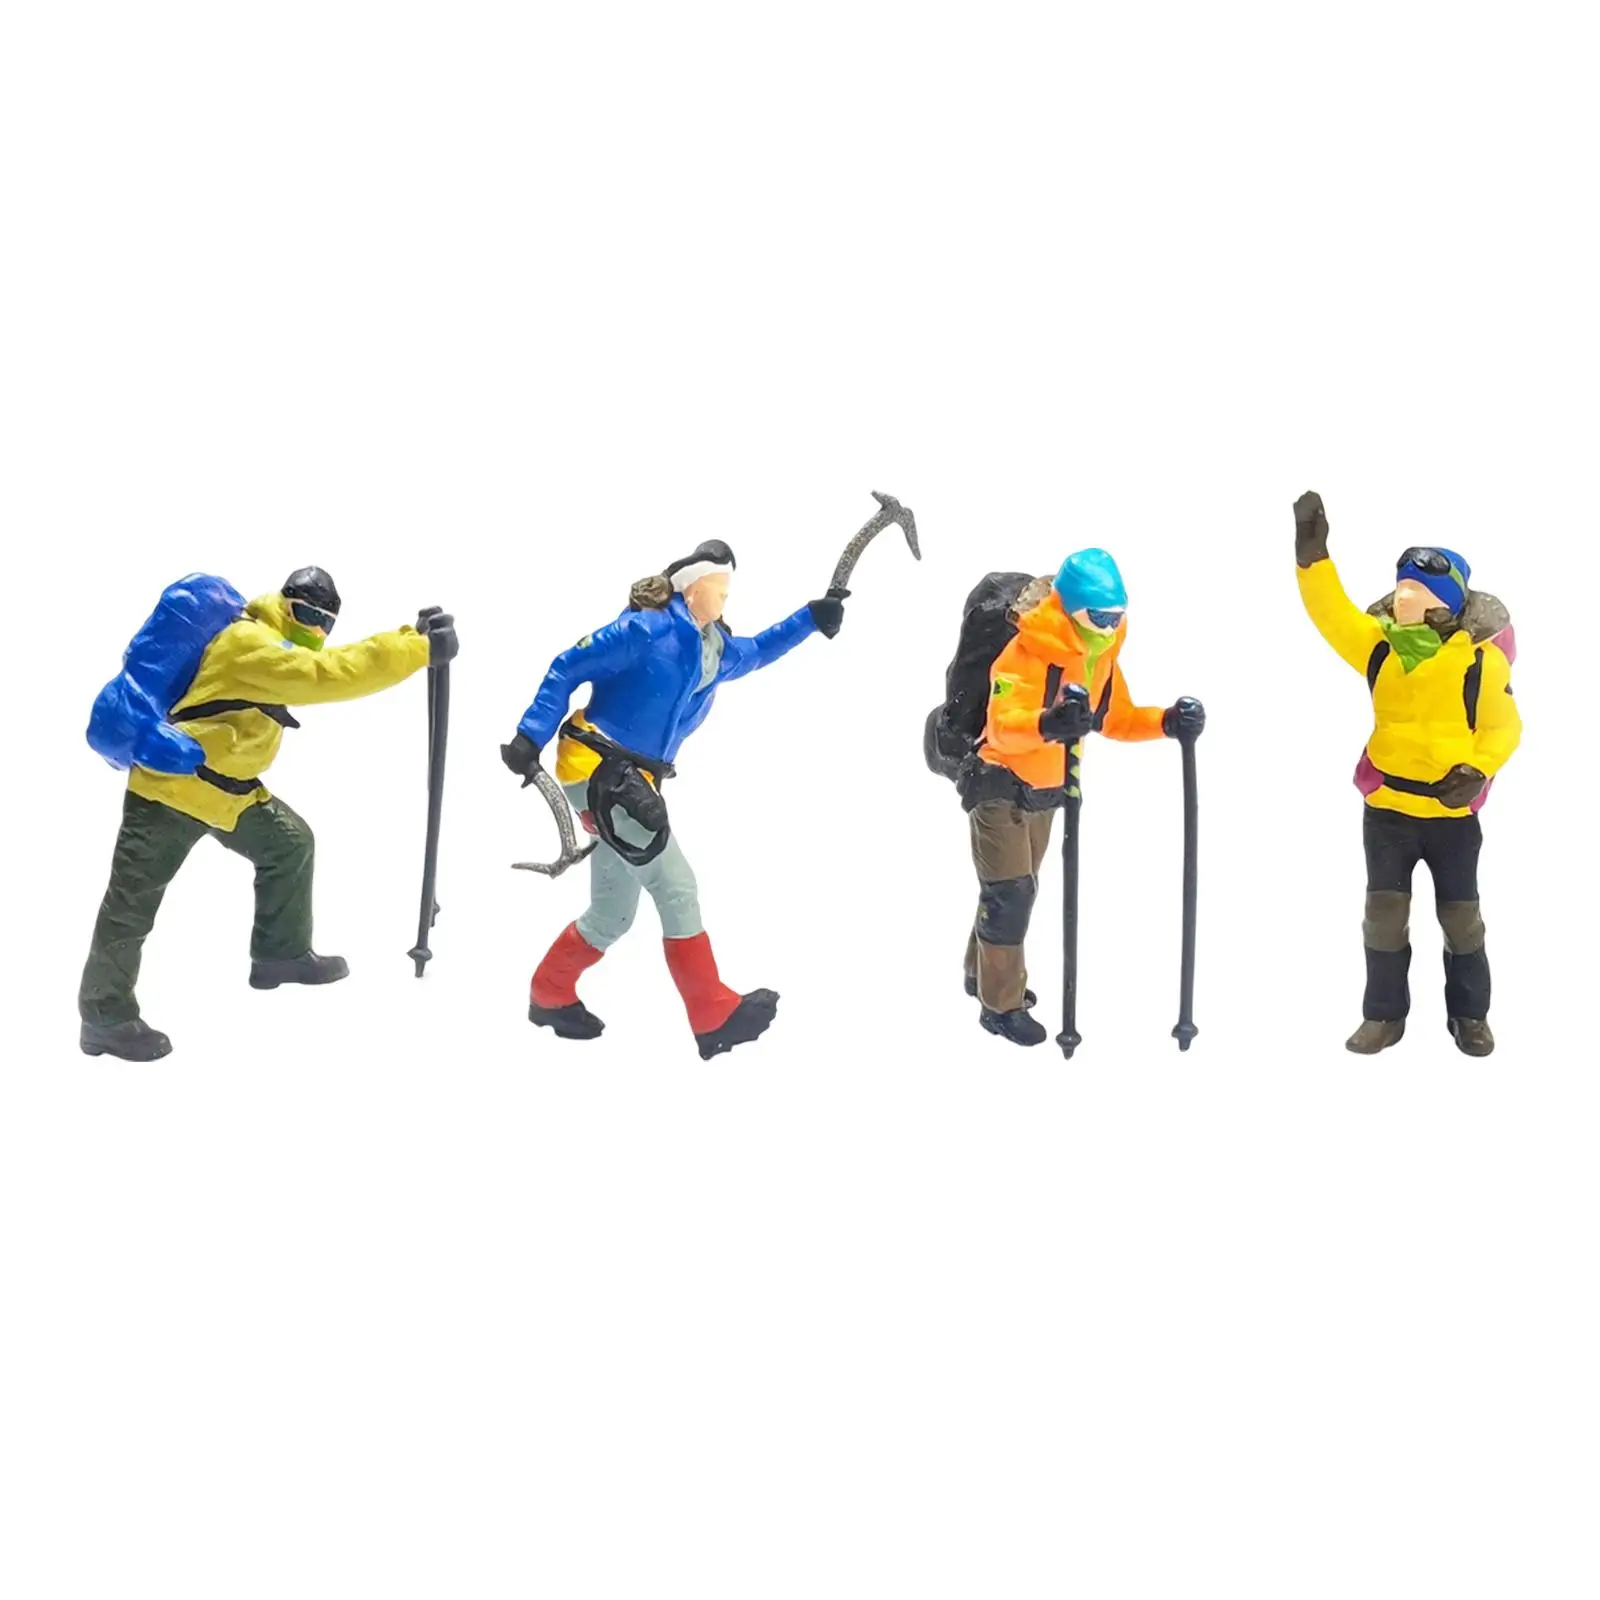 1/87 Climbing People Figurines Tiny People for DIY Projects Diorama Layout